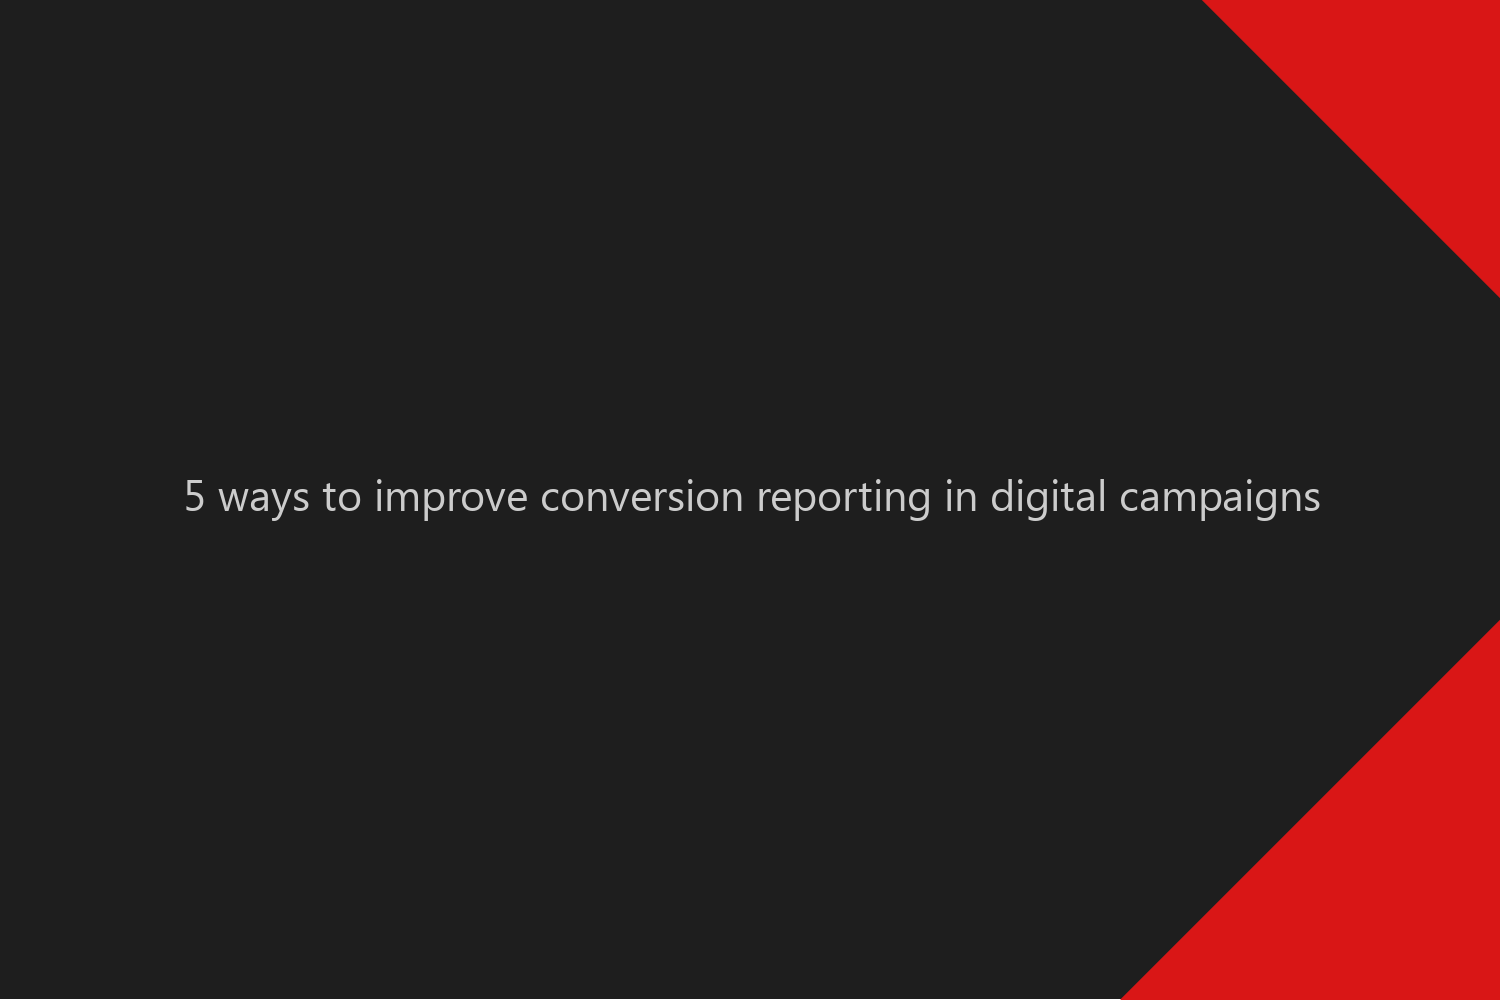 5 ways to improve conversion reporting in digital campaigns